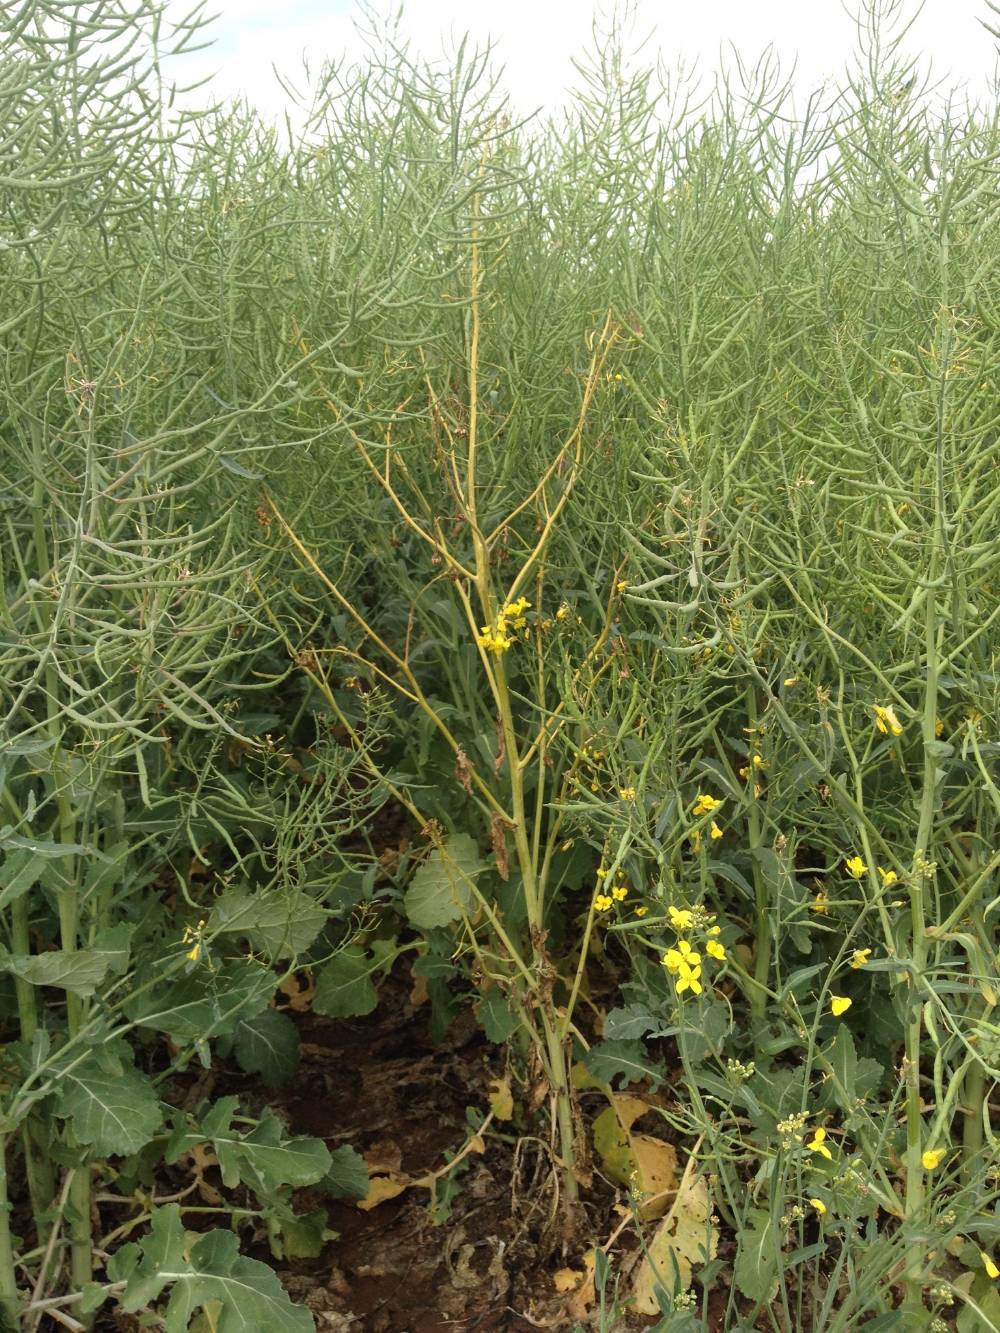 A plant in a field prematurely killed by Sclerotinia stem rot